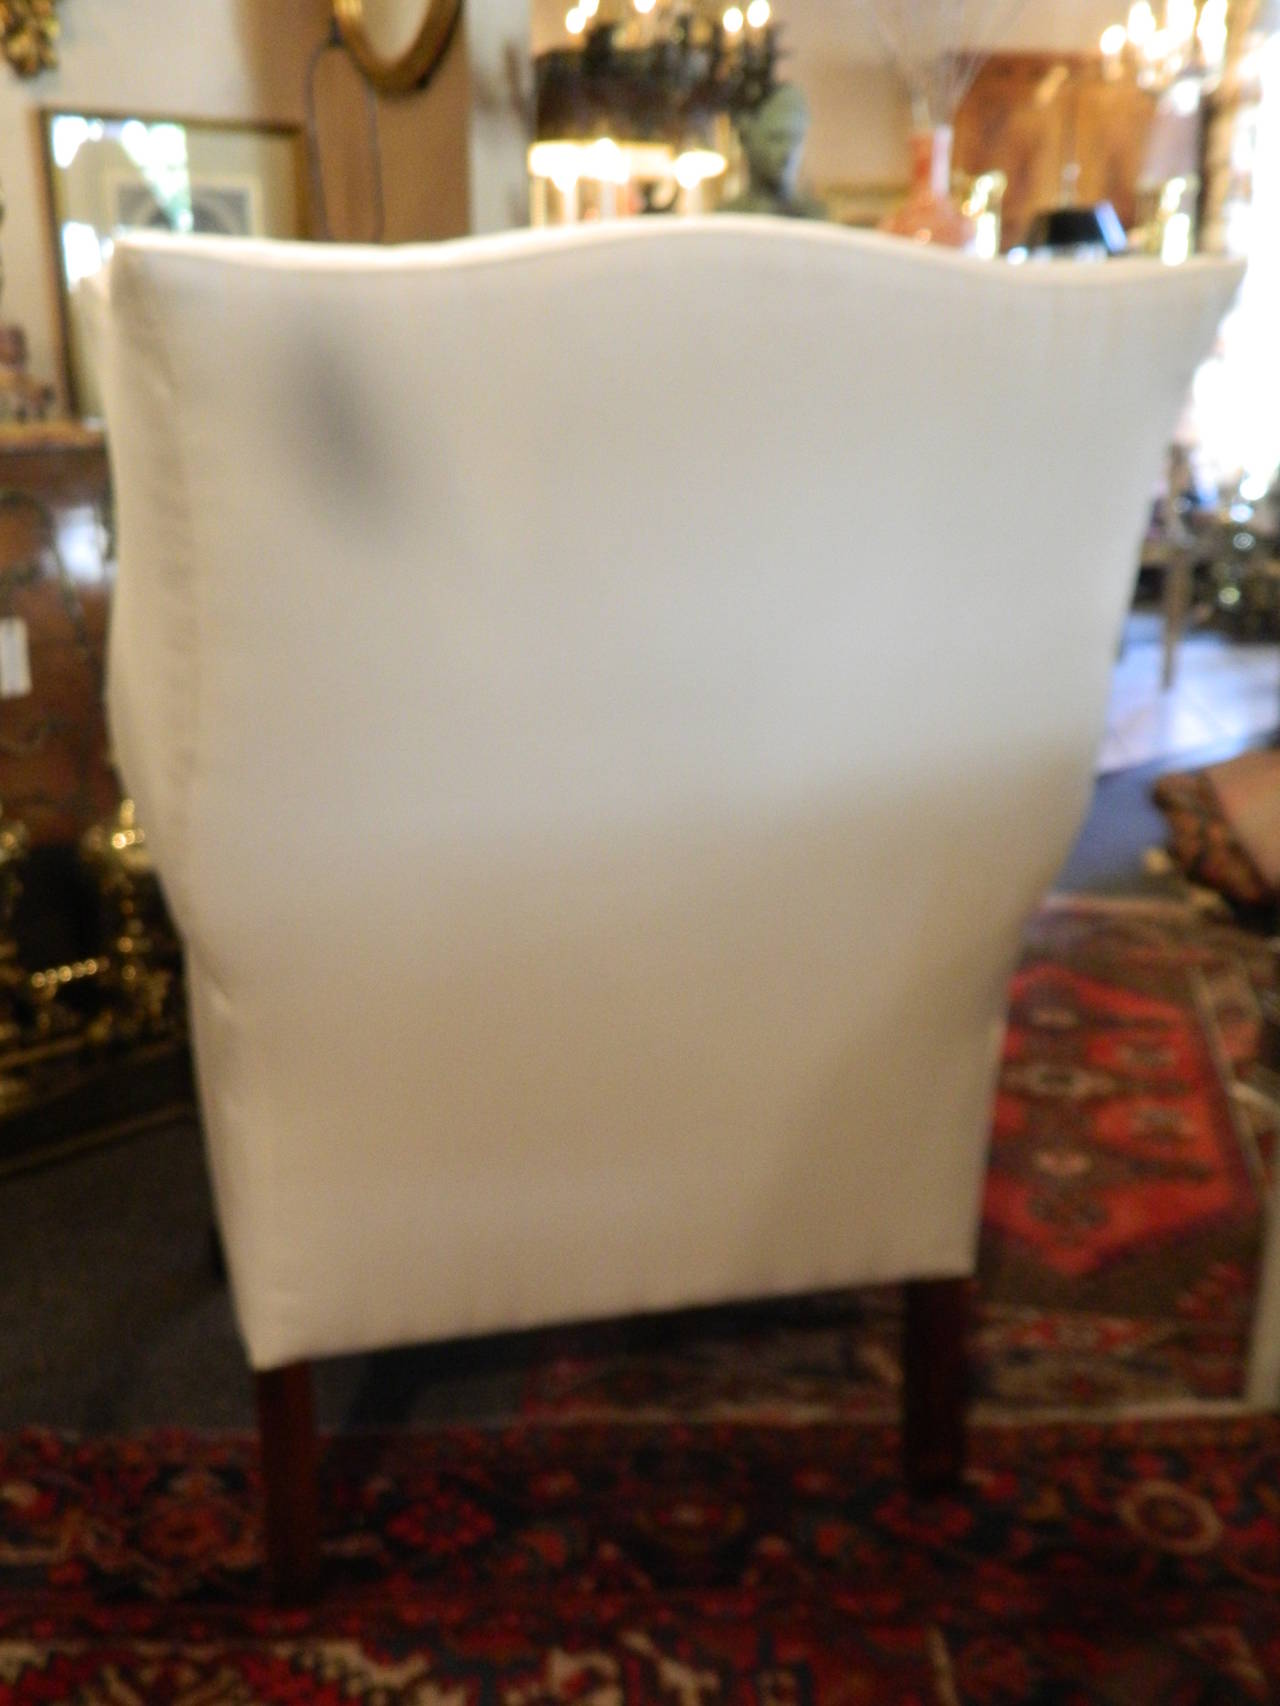 Chippendale style mahogany wingback chair, Early 20th century. Newly upholstered in white muslin. Down cushion.